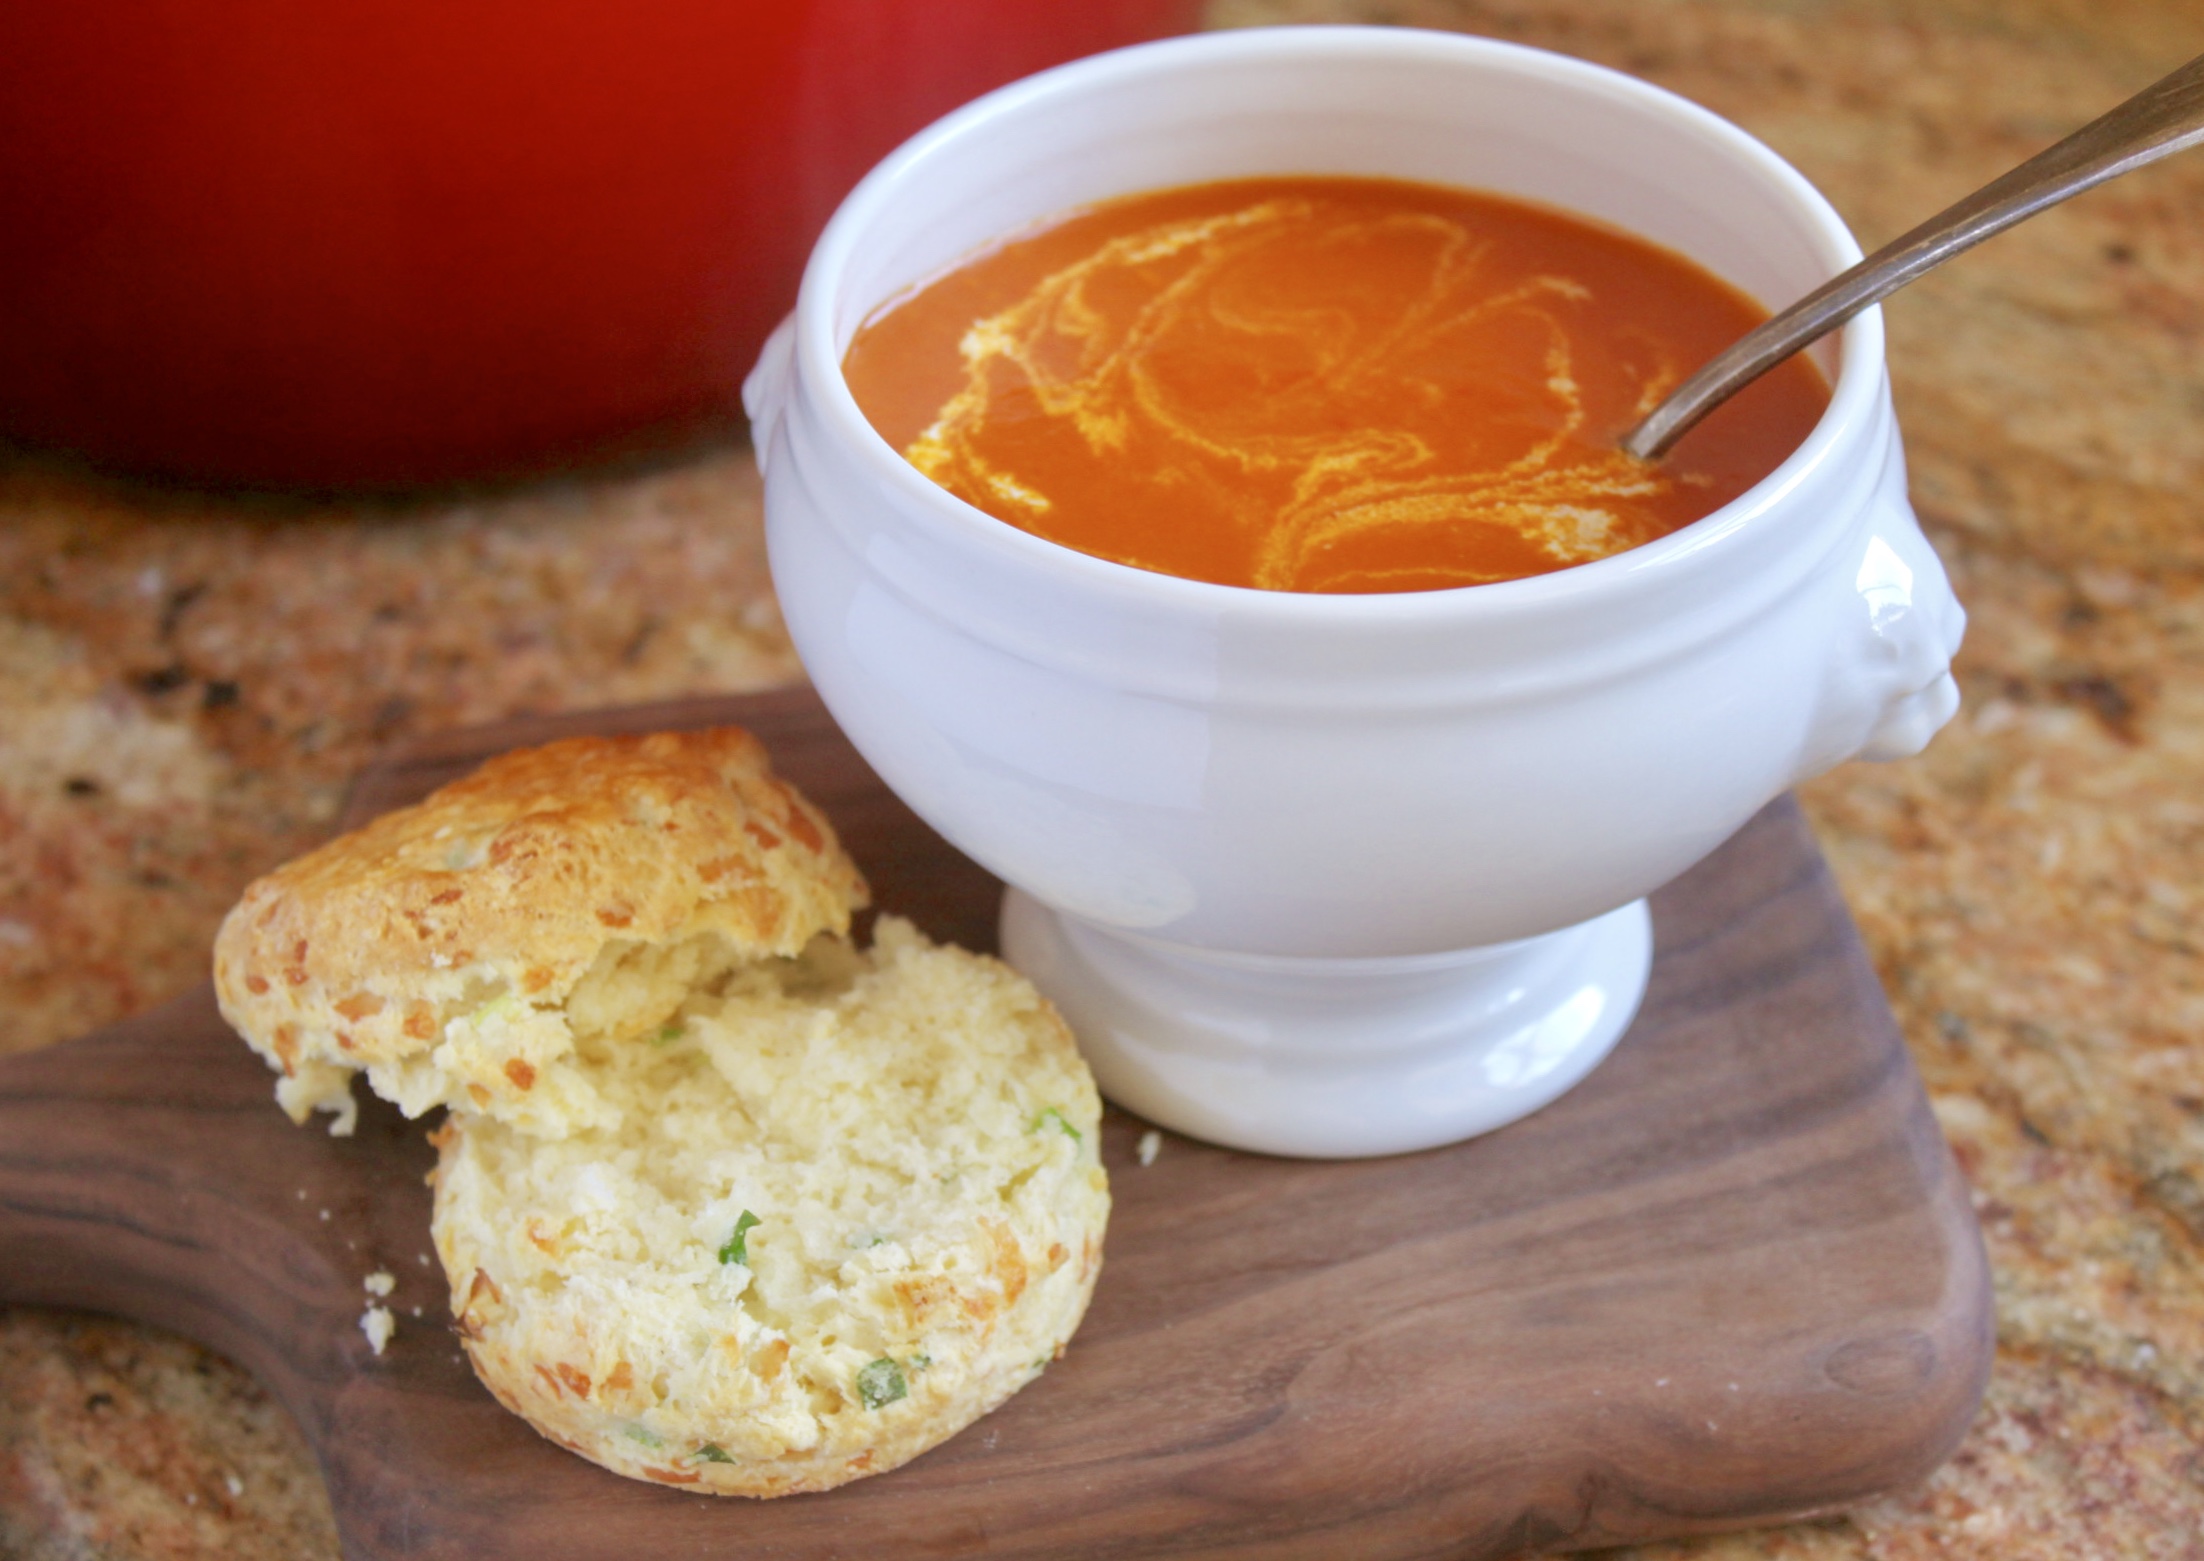 Tomato turmeric soup in a bowl with a cheese scone